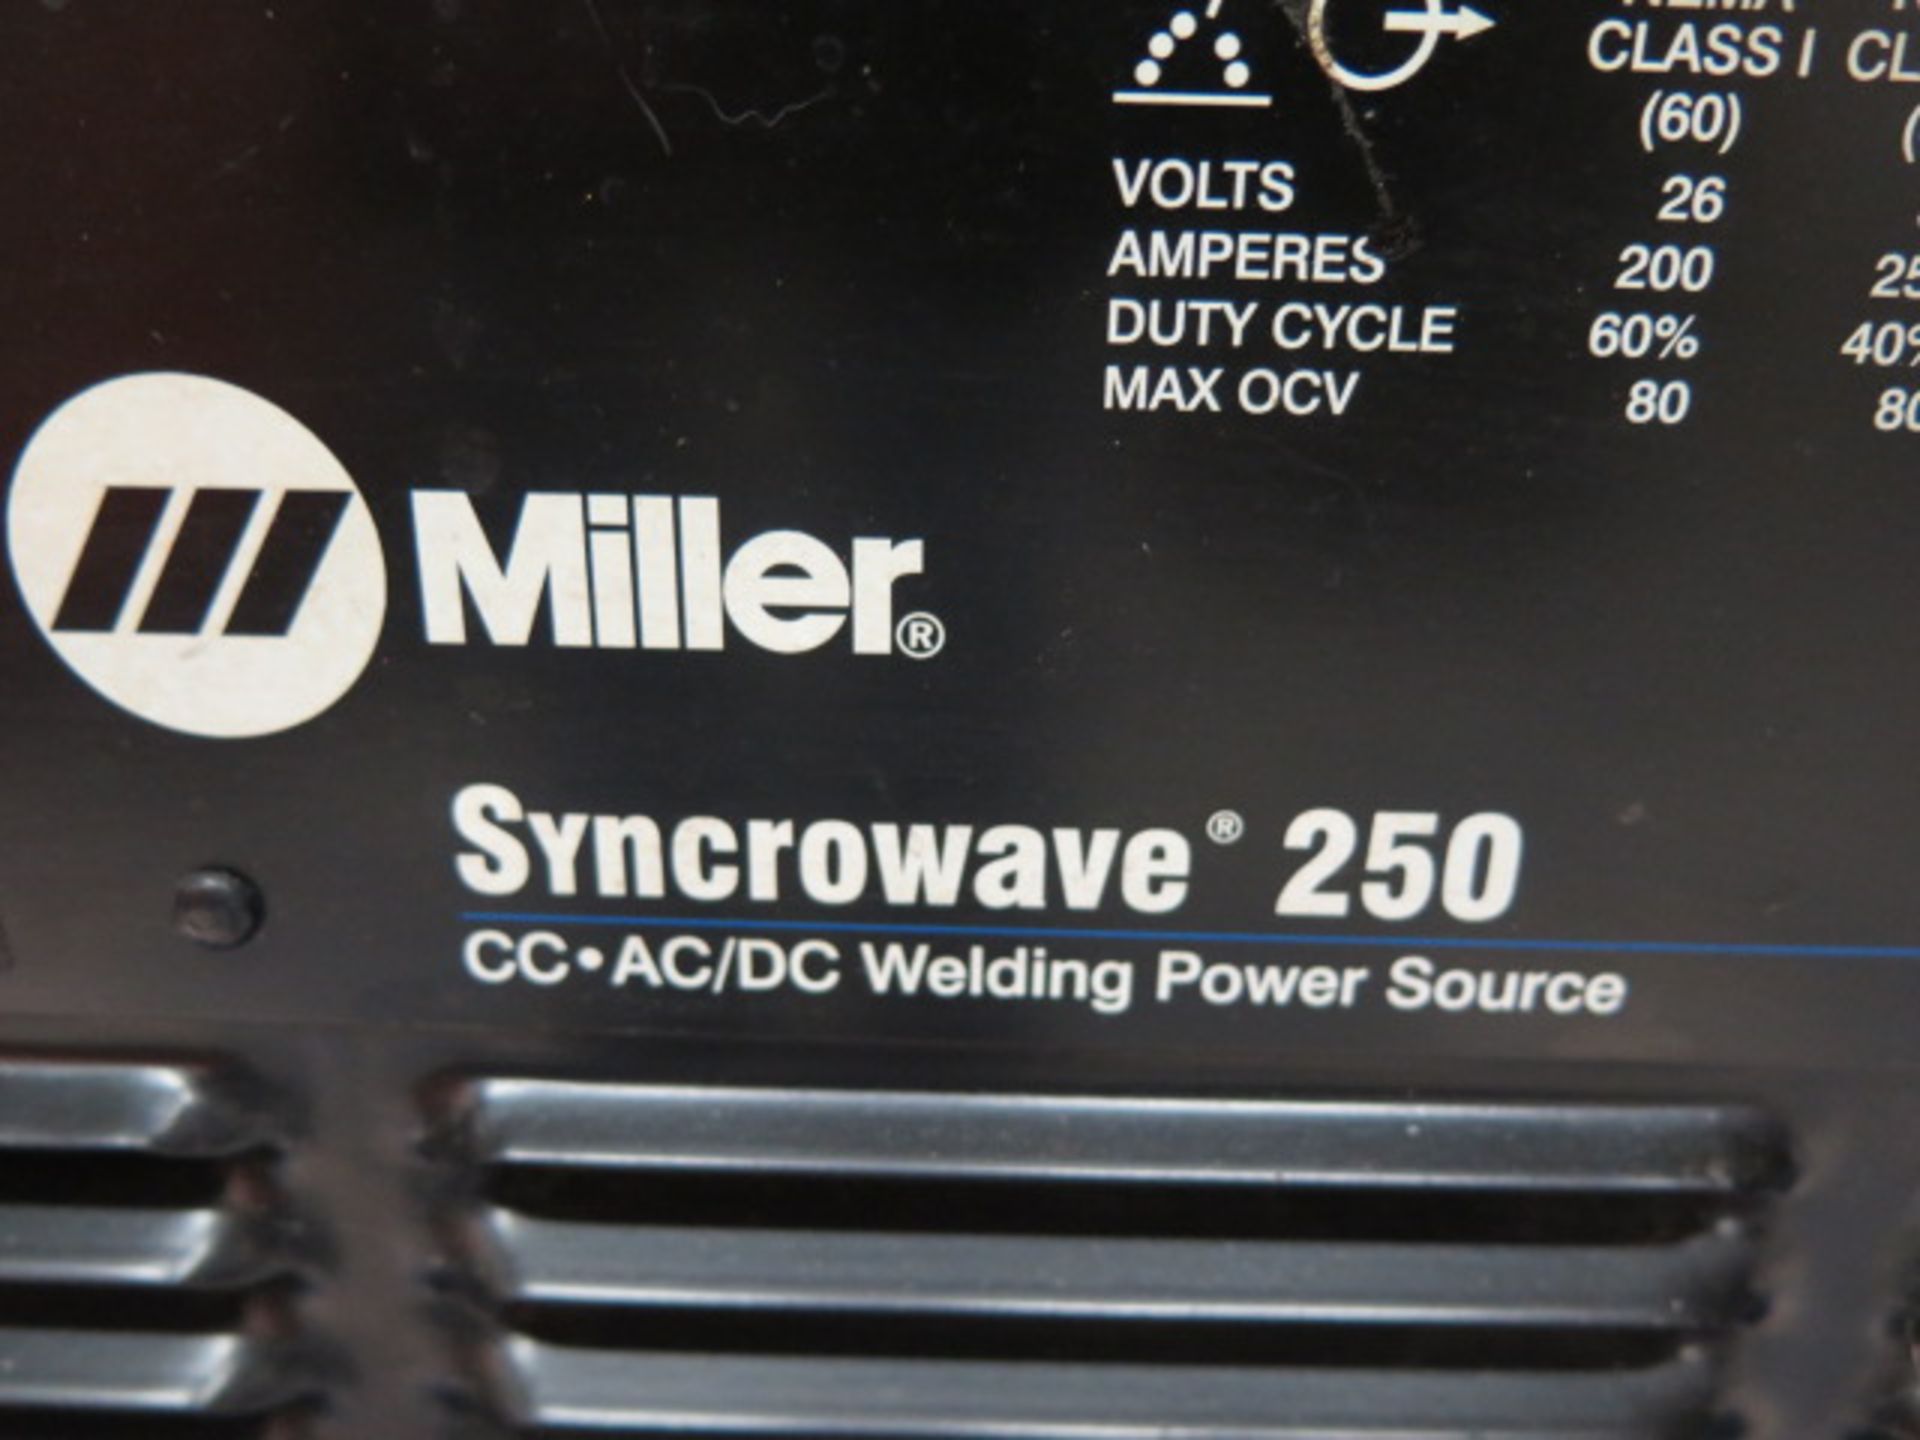 Miller Syncrowave 250 CC-AC/DC Arc Welding Power Source (SOLD AS-IS - NO WARRANTY) - Image 4 of 9